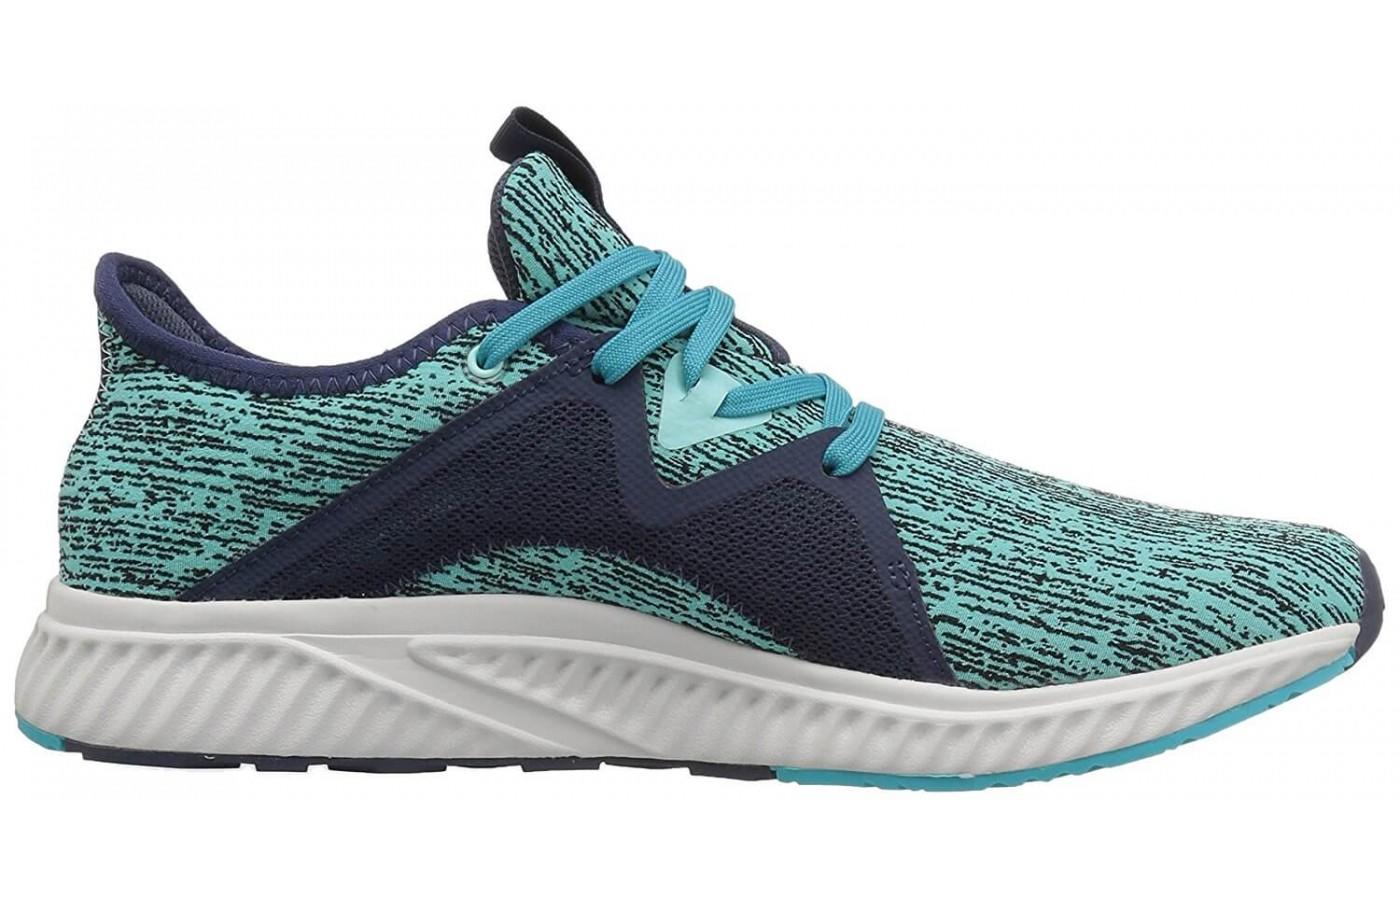 This is a lightweight, versatile running and cross training shoe. 